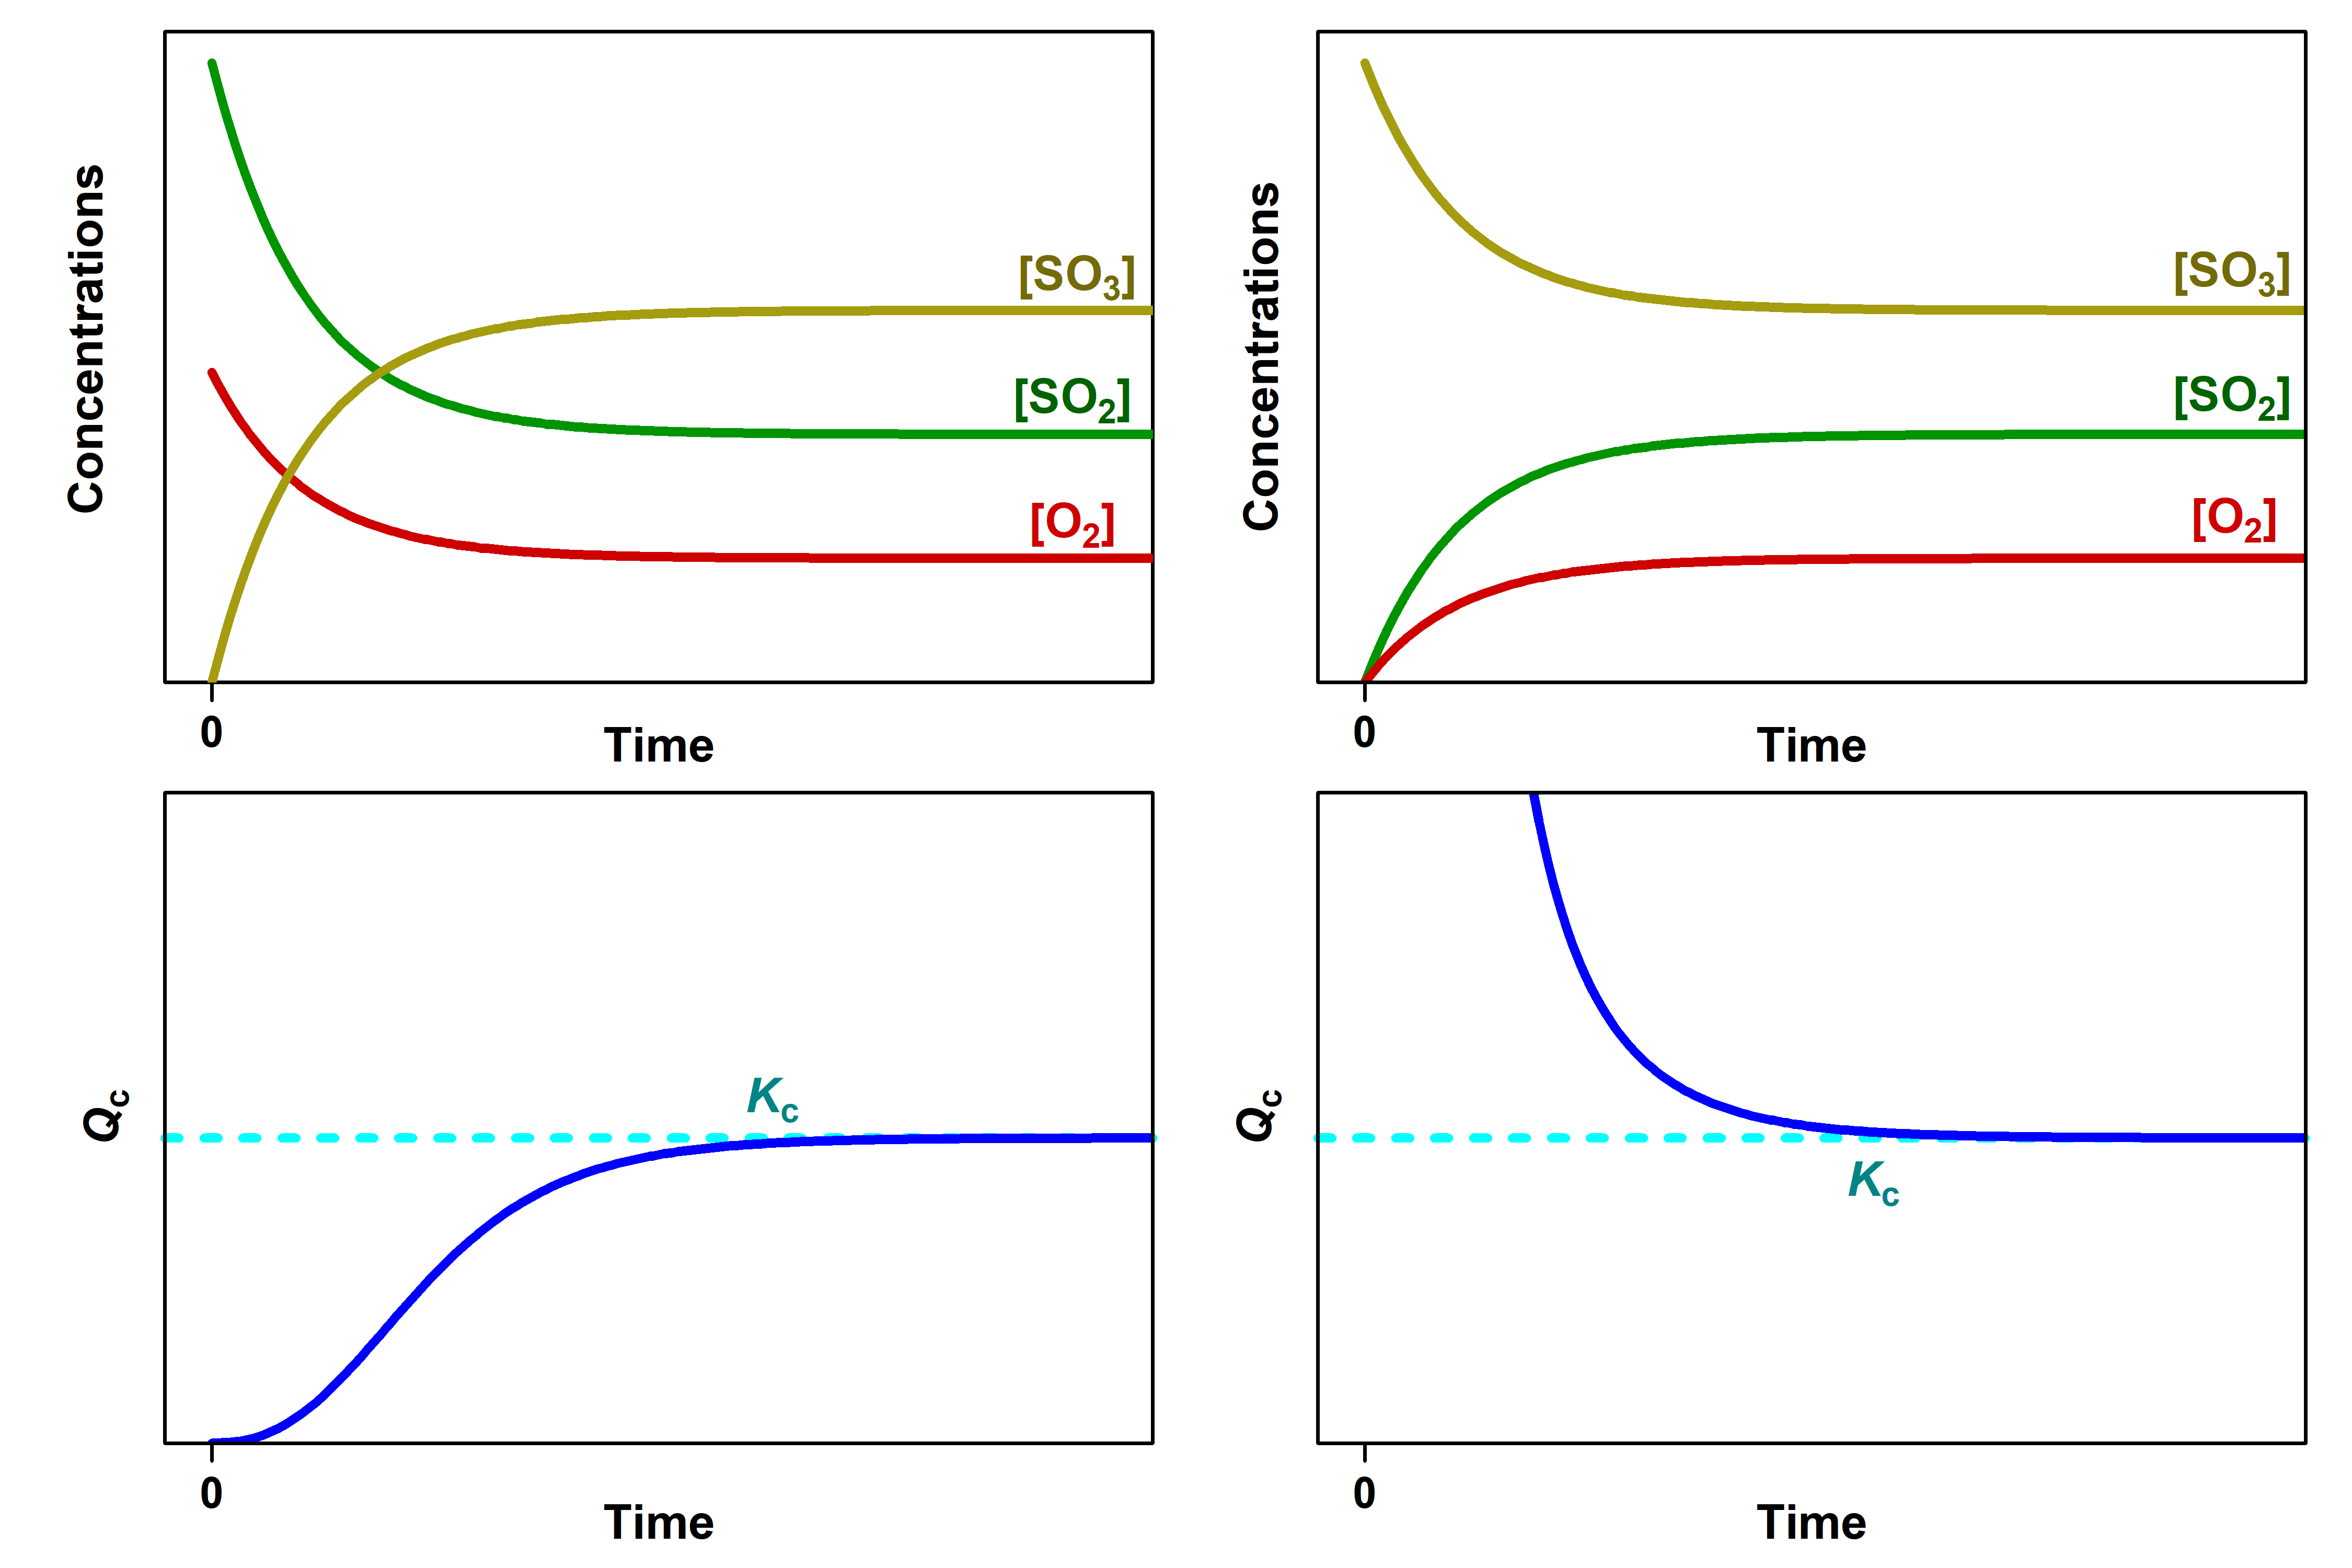 Four graphs are shown. The y-axis on top left graph is labeled, “Concentration,” and the x-axis is labeled, “Time.” Three curves are plotted on graph. The first is labeled, “[ S O subscript 2 ];” this line starts high on the y-axis, ends midway down the y-axis, has a steep initial slope and a more gradual slope as it approaches the far right on the x-axis. The second curve on this graph is labeled, “[ O subscript 2 ];” this line mimics the first except that it starts and ends about fifty percent lower on the y-axis. The third curve is the inverse of the first in shape and is labeled, “[ S O subscript 3 ].” The y-axis on top right graph is labeled, “Concentration,” and the x-axis is labeled, “Time.” Three curves are plotted on graph b. The first is labeled, “[ S O subscript 2 ];” this line starts low on the y-axis, ends midway up the y-axis, has a steep initial slope and a more gradual slope as it approaches the far right on the x-axis. The second curve on this graph is labeled, “[ O subscript 2 ];” this line mimics the first except that it ends about fifty percent lower on the y-axis. The third curve is the inverse of the first in shape and is labeled, “[ S O subscript 3 ].” The y-axis on bottom left graph is labeled, “Reaction Quotient,” and the x-axis is labeled, “Time.” A single curve is plotted on graph c. This curve begins at the bottom of the y-axis and rises steeply up near the top of the y-axis, then levels off into a horizontal line. The top point of this line is labeled, “kc.”